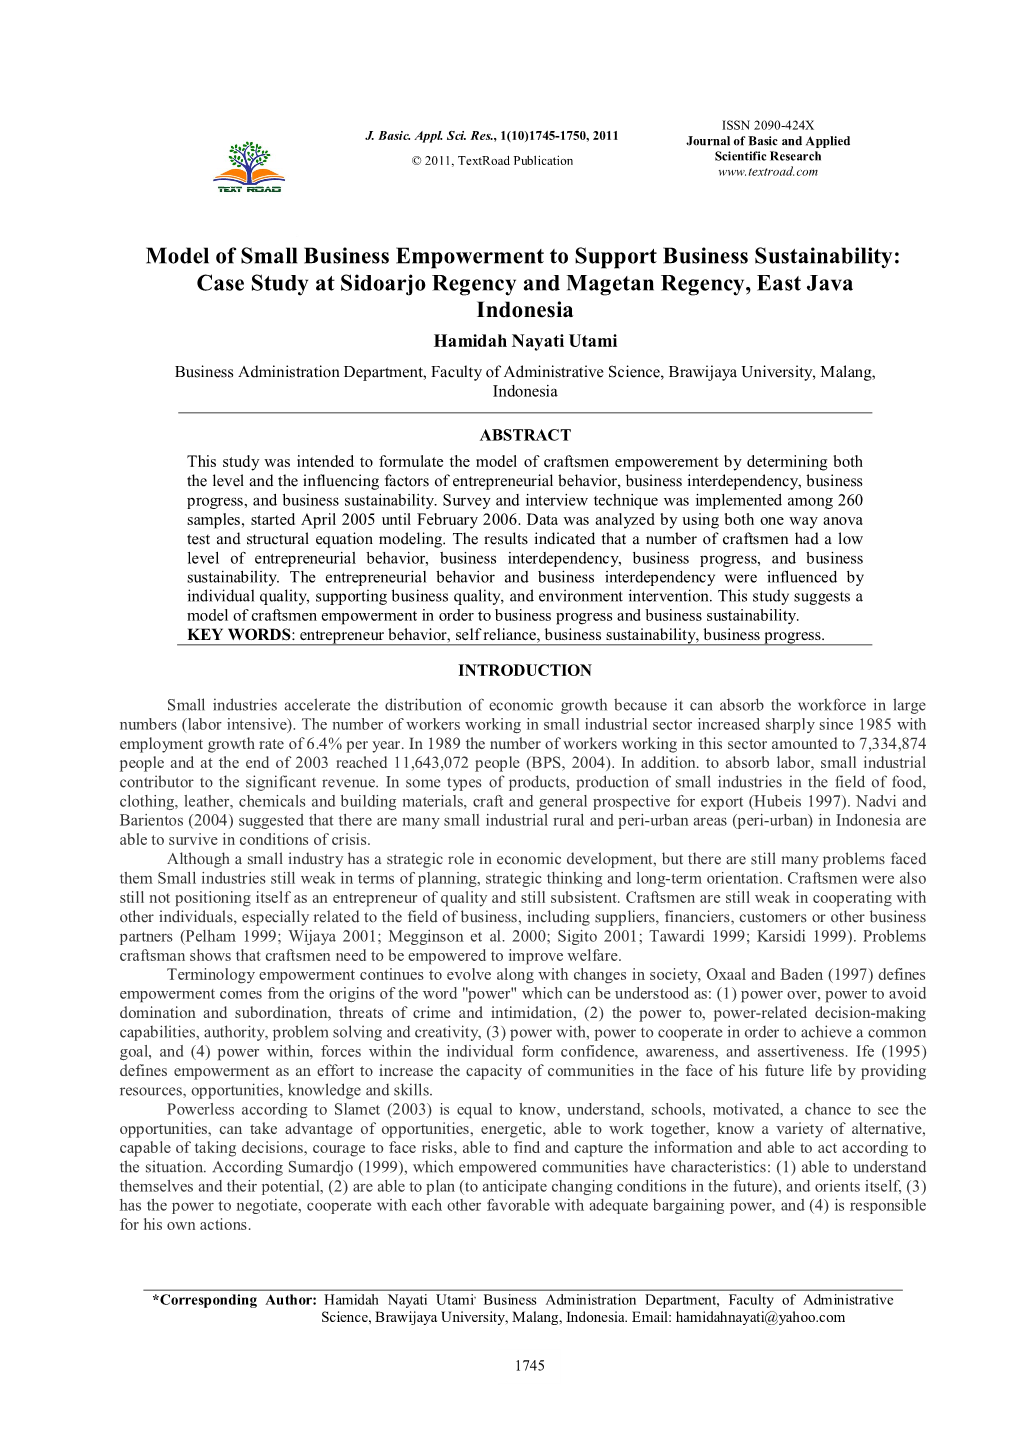 Model of Small Business Empowerment to Support Business Sustainability: Case Study at Sidoarjo Regency and Magetan Regency, East Java Indonesia